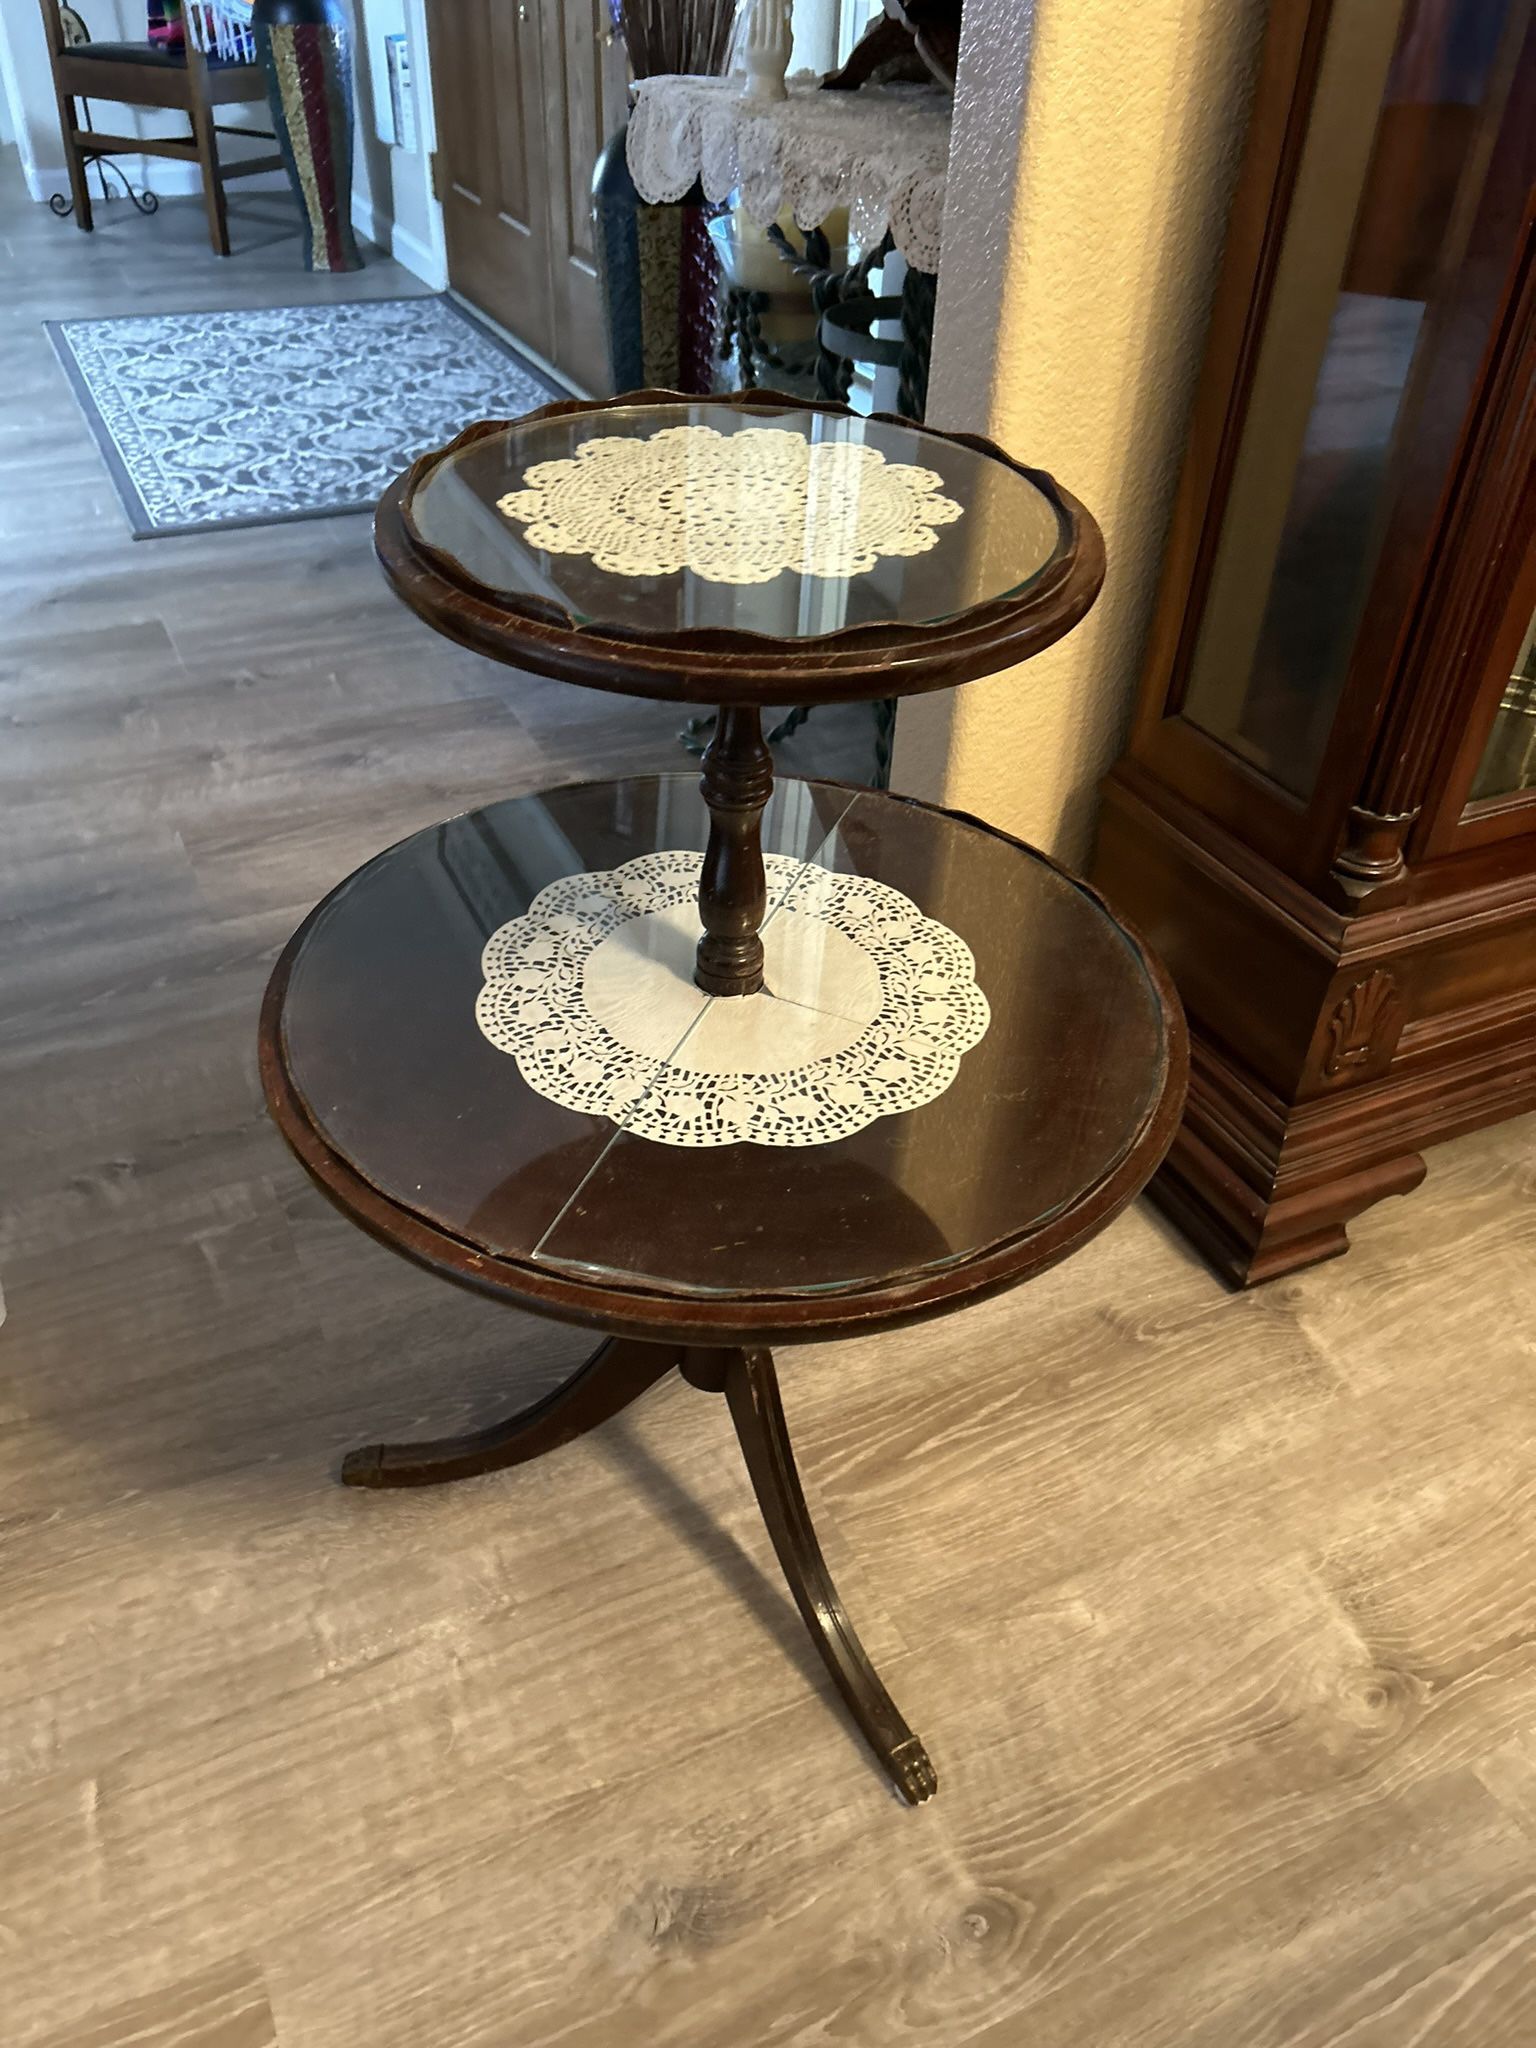 Old Two Tiered Table